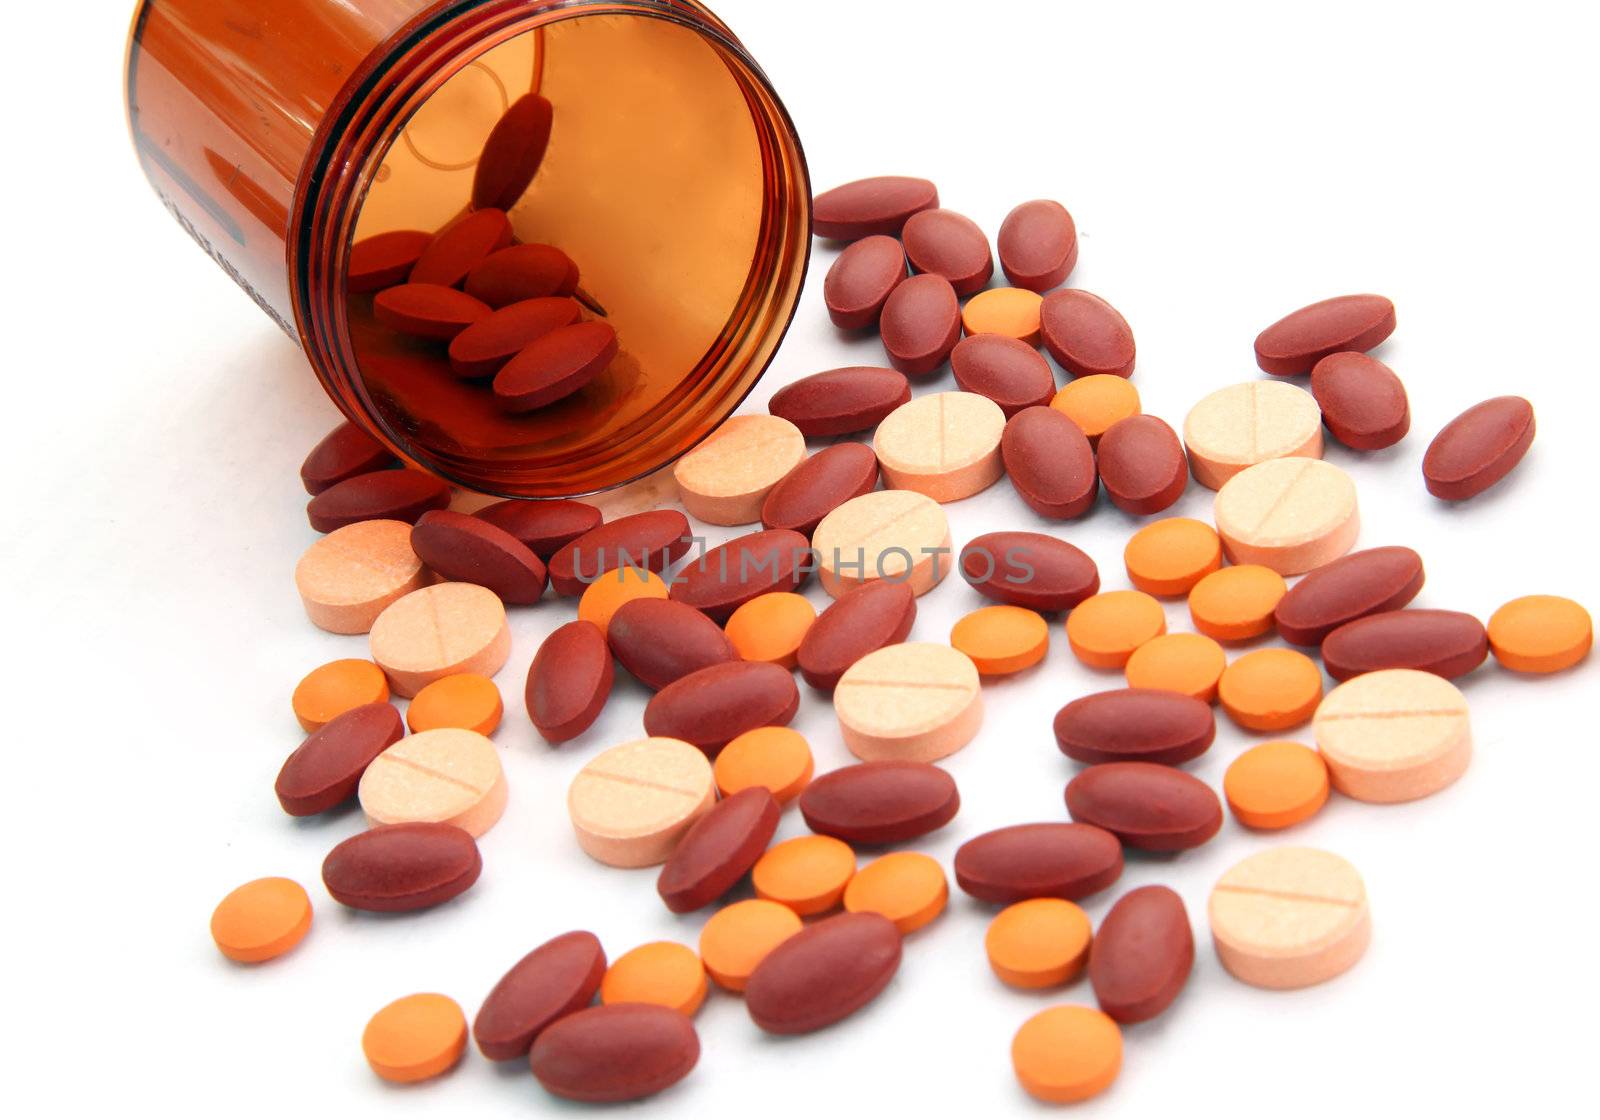 Persepctive of Open pill bottle with medicine spilling out isolated on white background